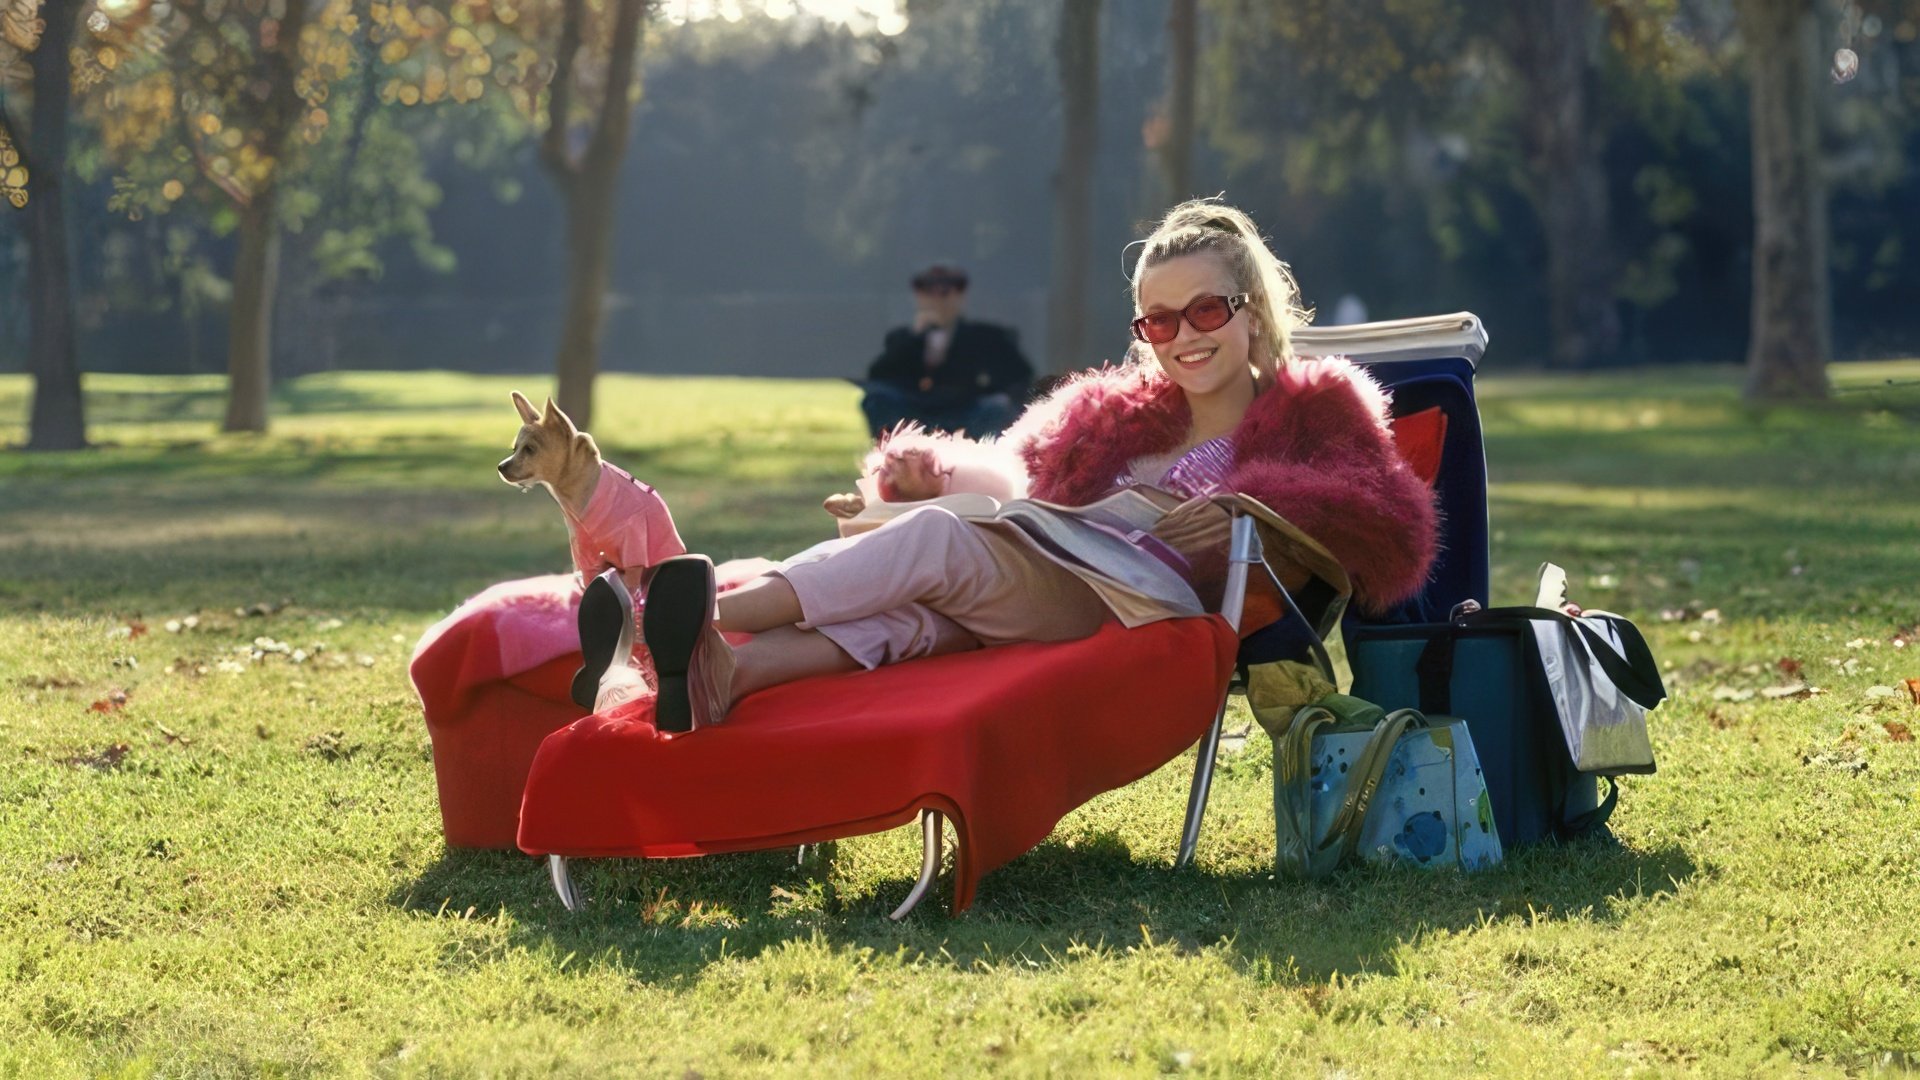 Reese Witherspoon as the glamorous lawyer Elle Woods